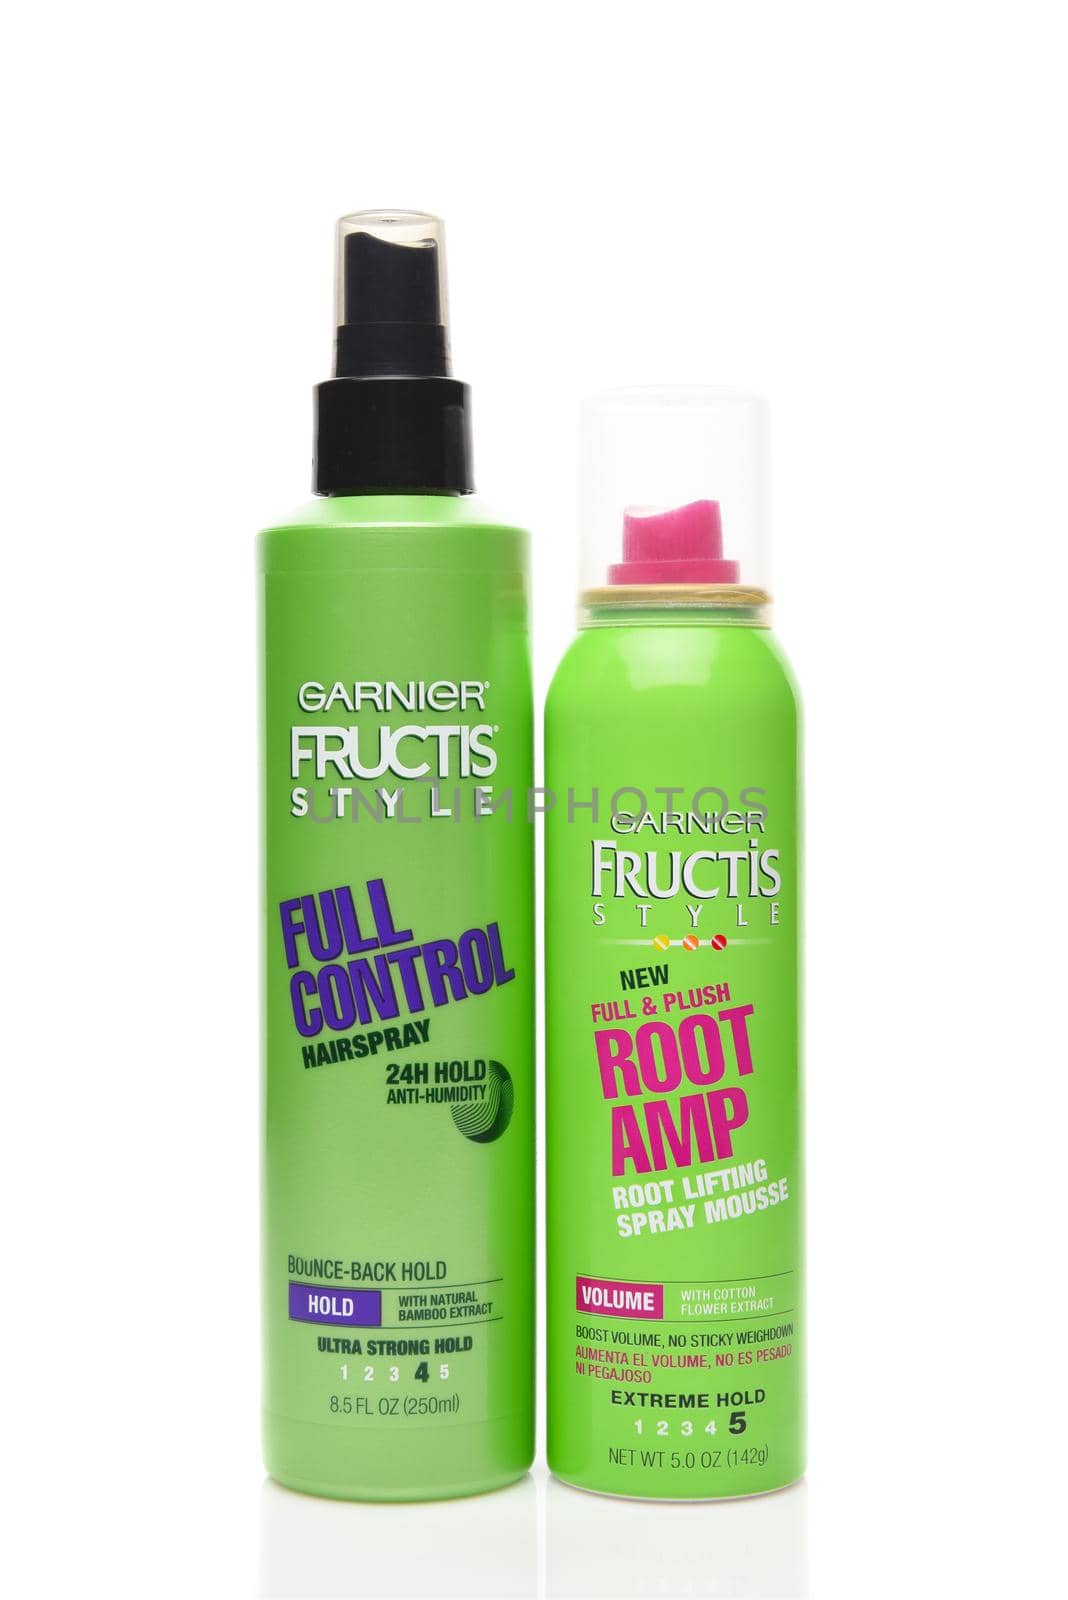 IRVINE, CALIFORNIA - AUGUST 20, 2019:  A bottle of Garnier Fructis Full Control Hairspray, and a can of Garnier Fructis Root Amp Spray Mousse.  by sCukrov